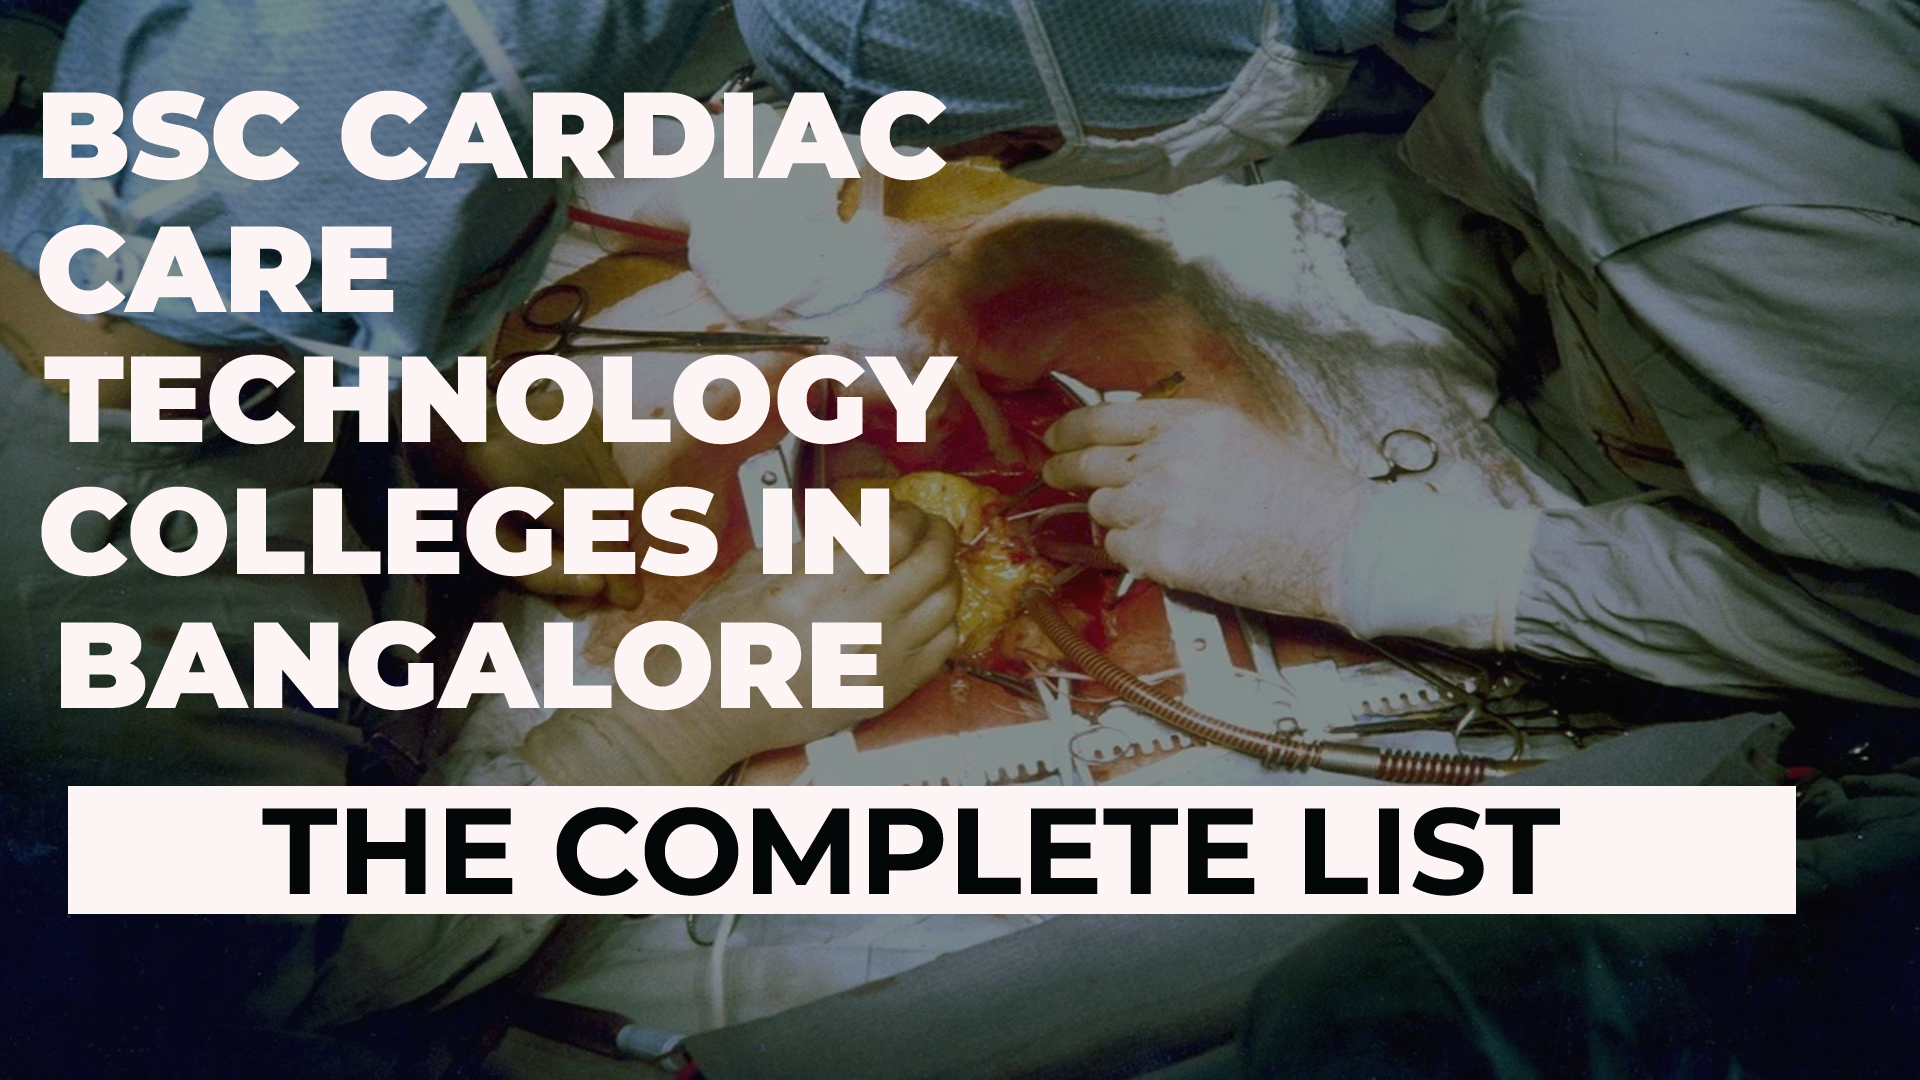 BSc Cardiac Care Technology Colleges in Bangalore